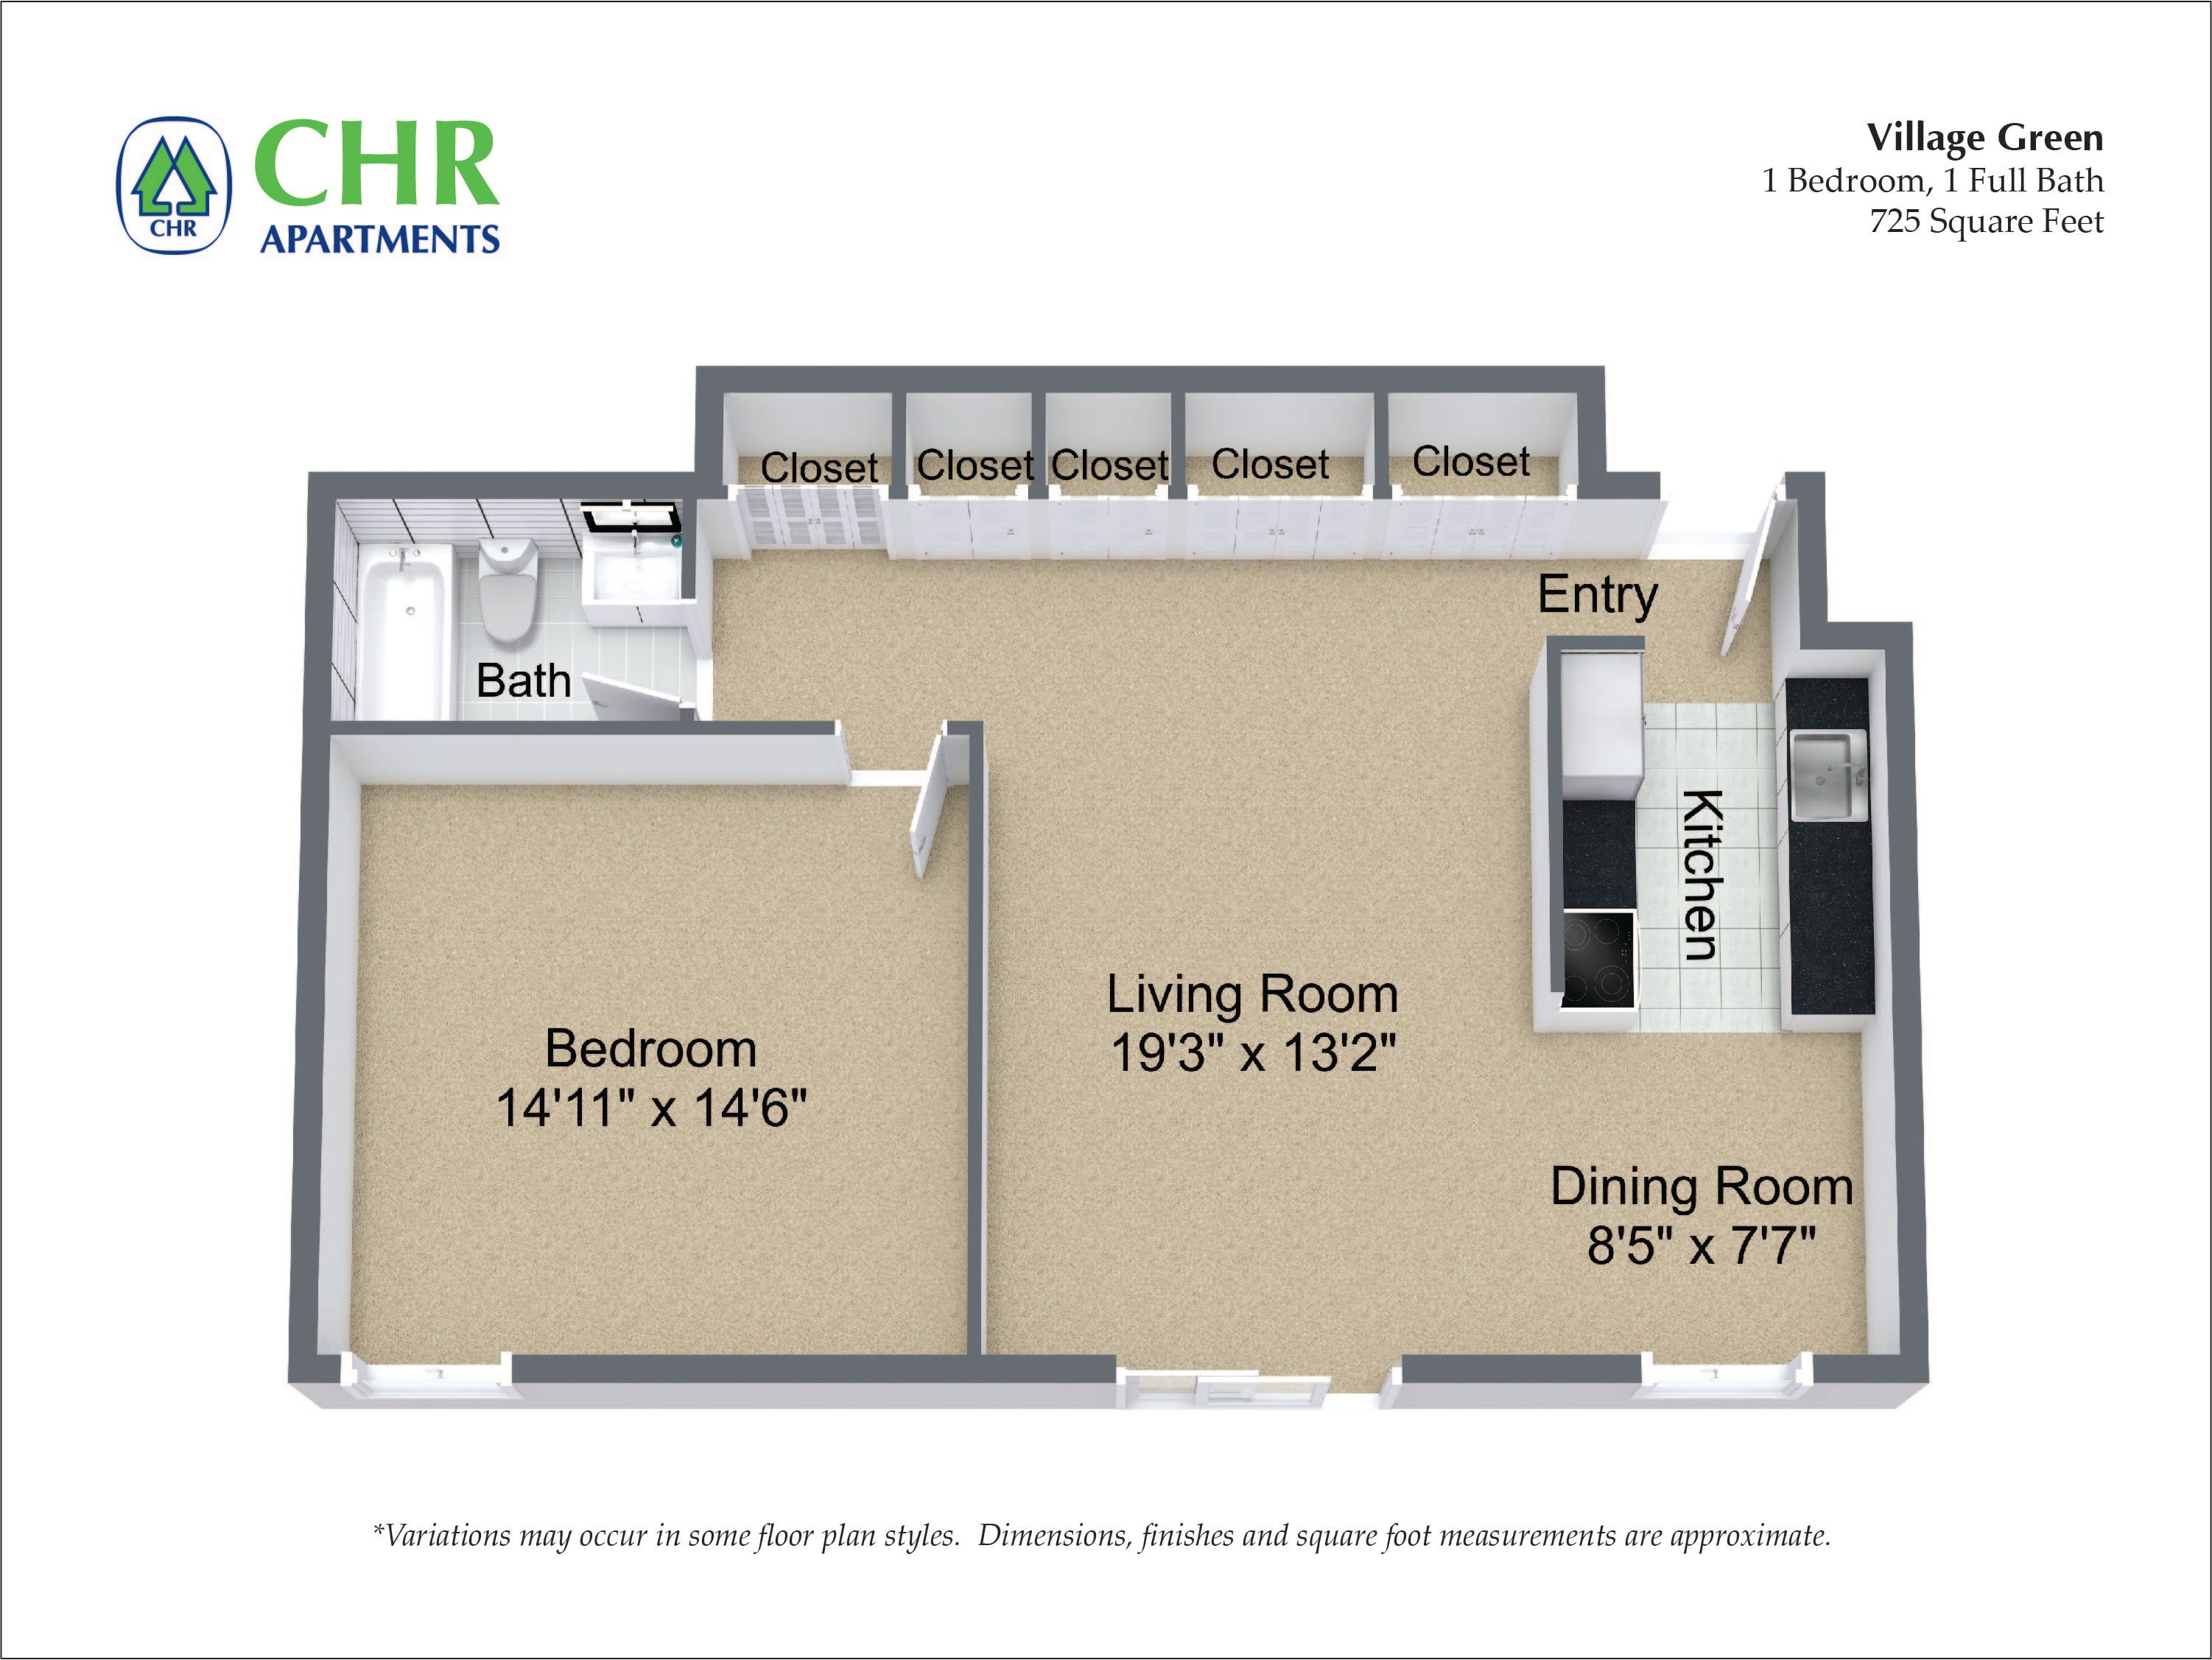 Click to view Floor plan 1 Bedroom with Many Closets image 1